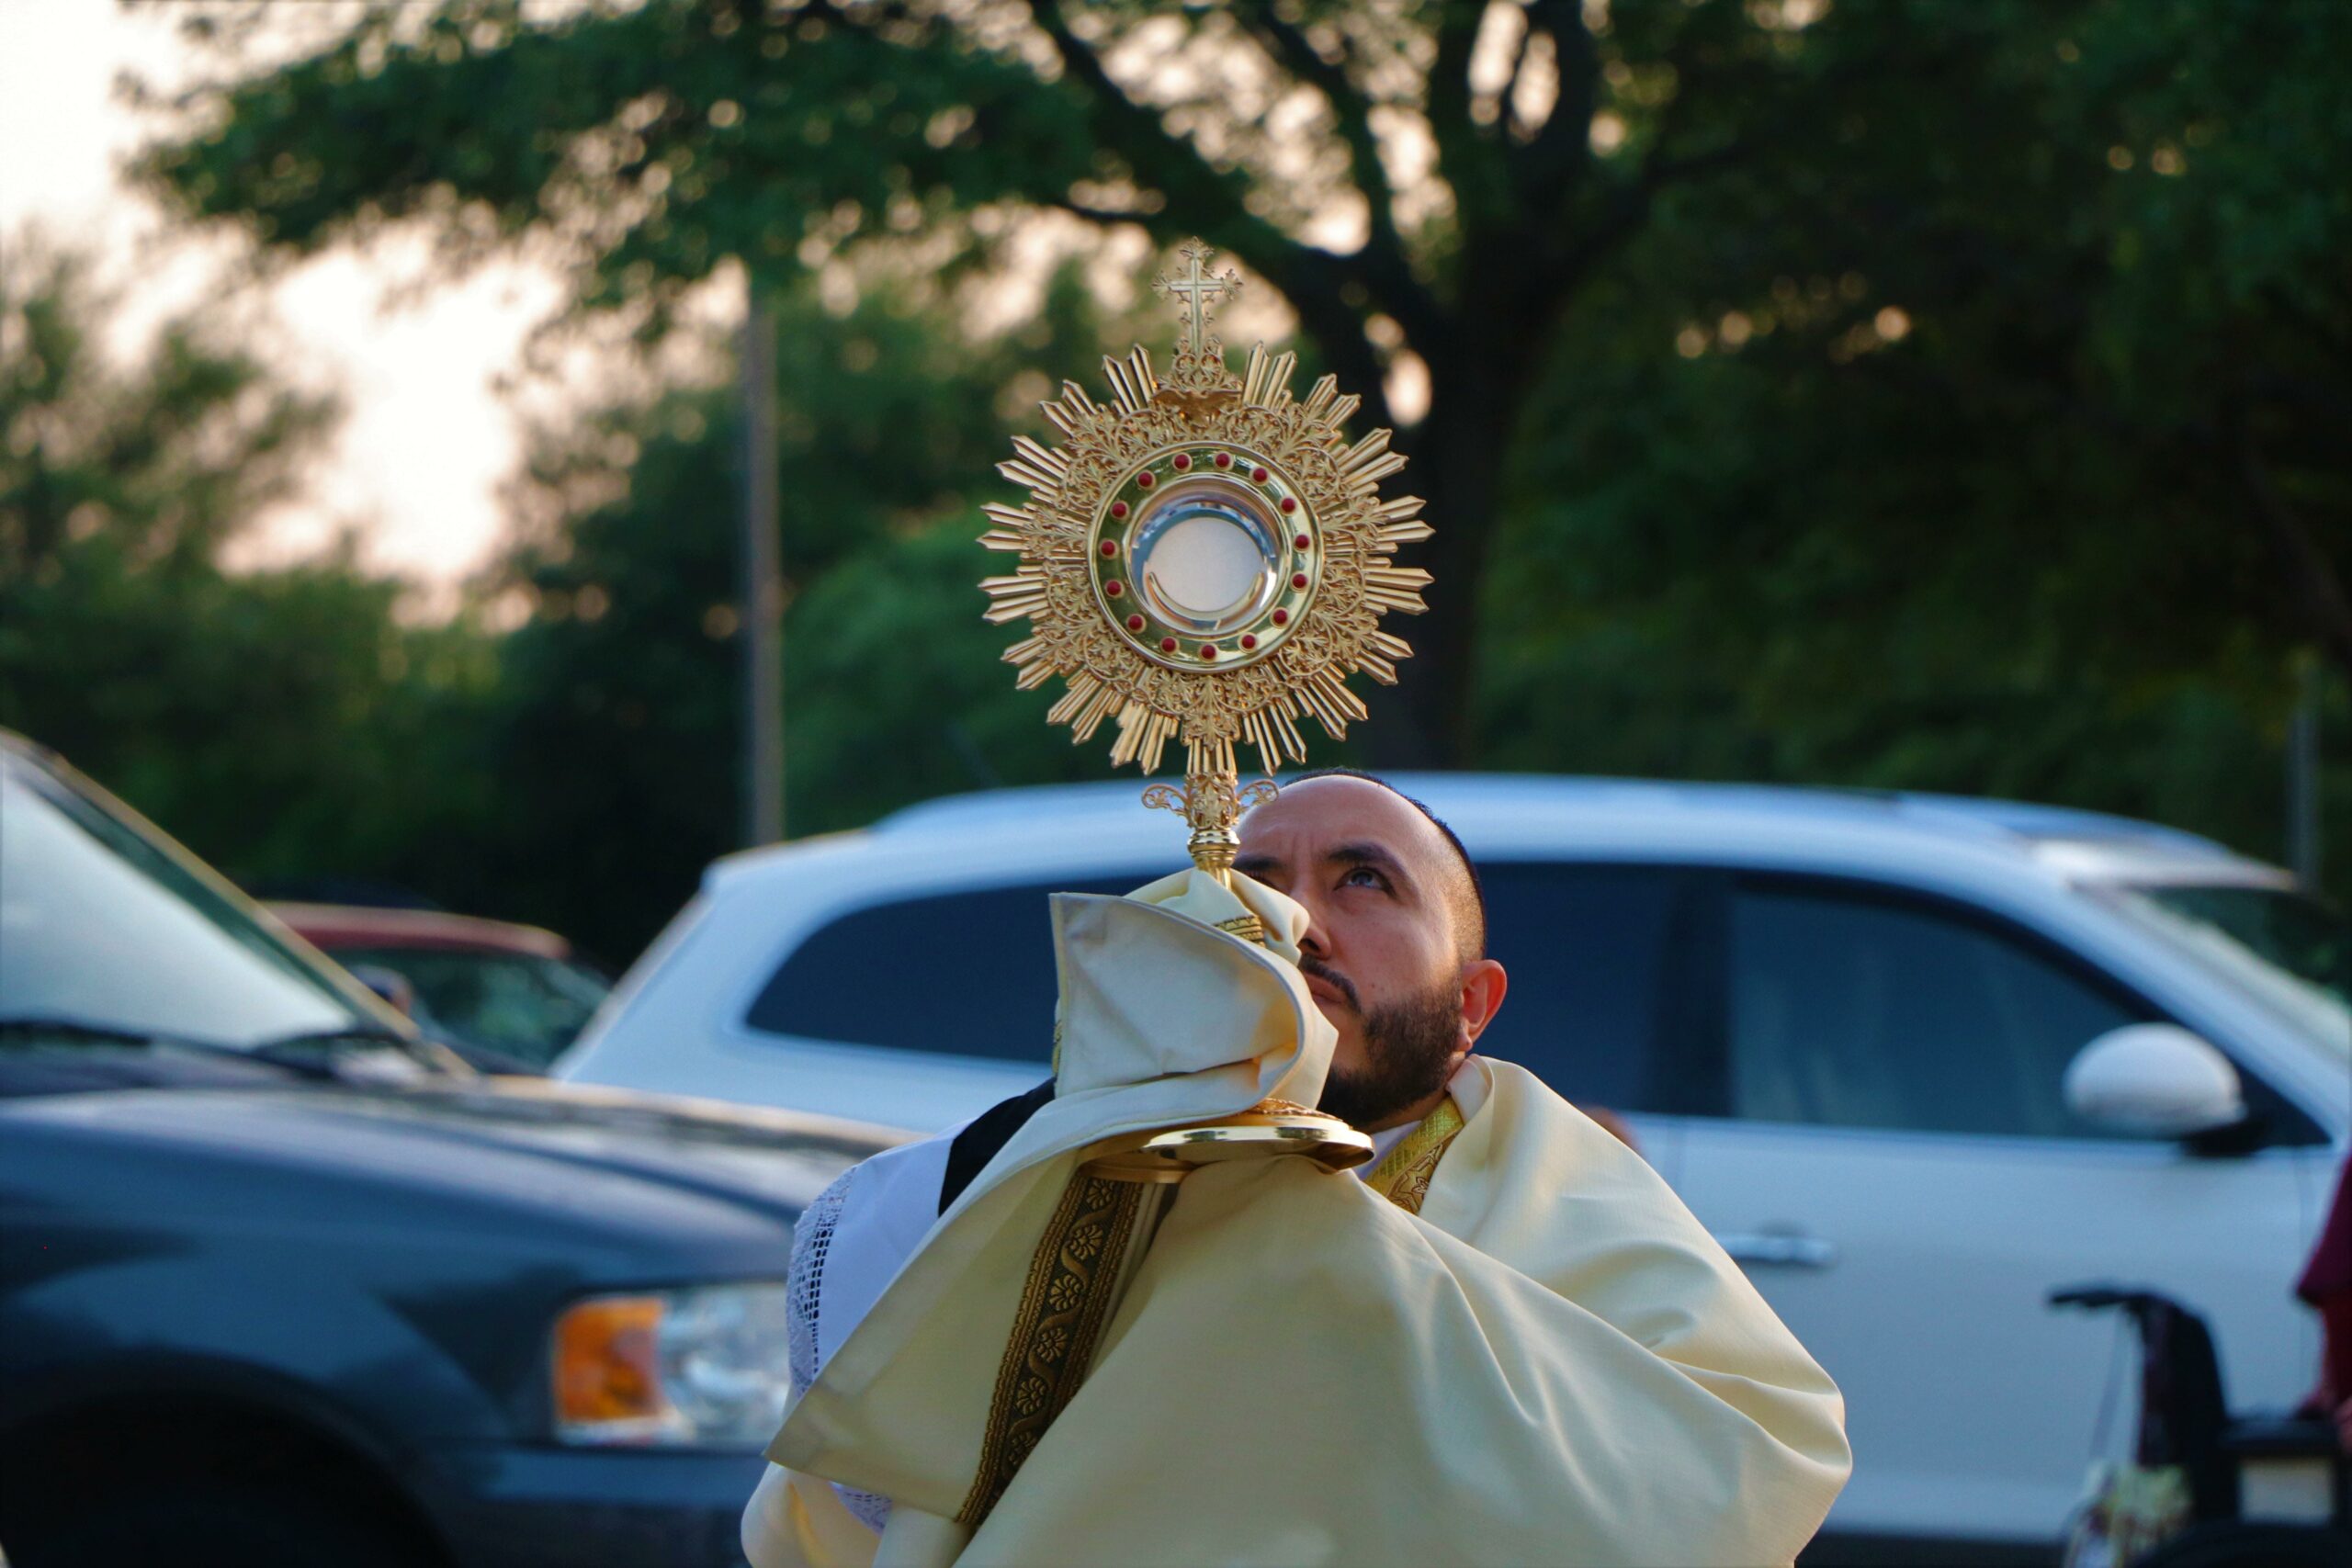 religious significance of the Eucharist